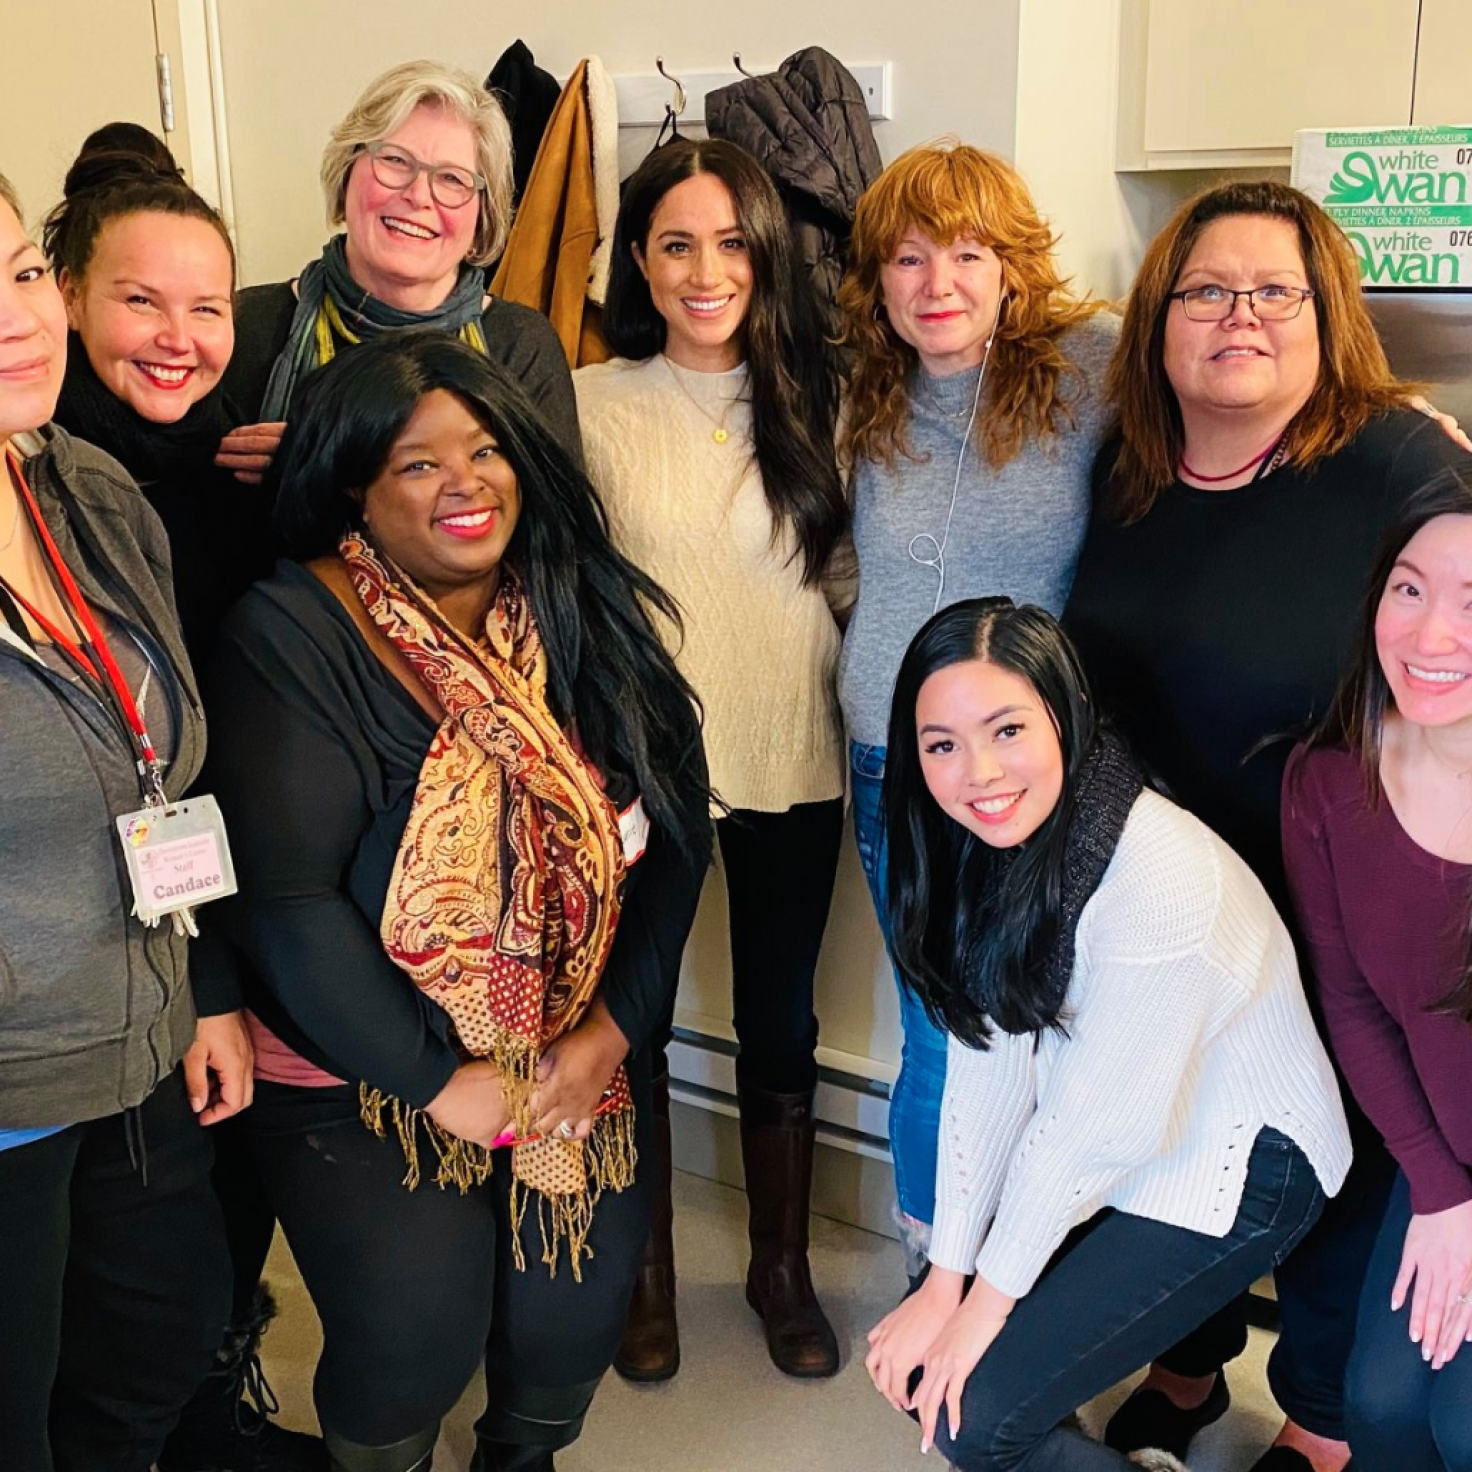 Meghan Markle's First Public Appearance After Royal Separation Is To A Vancouver Women's Center